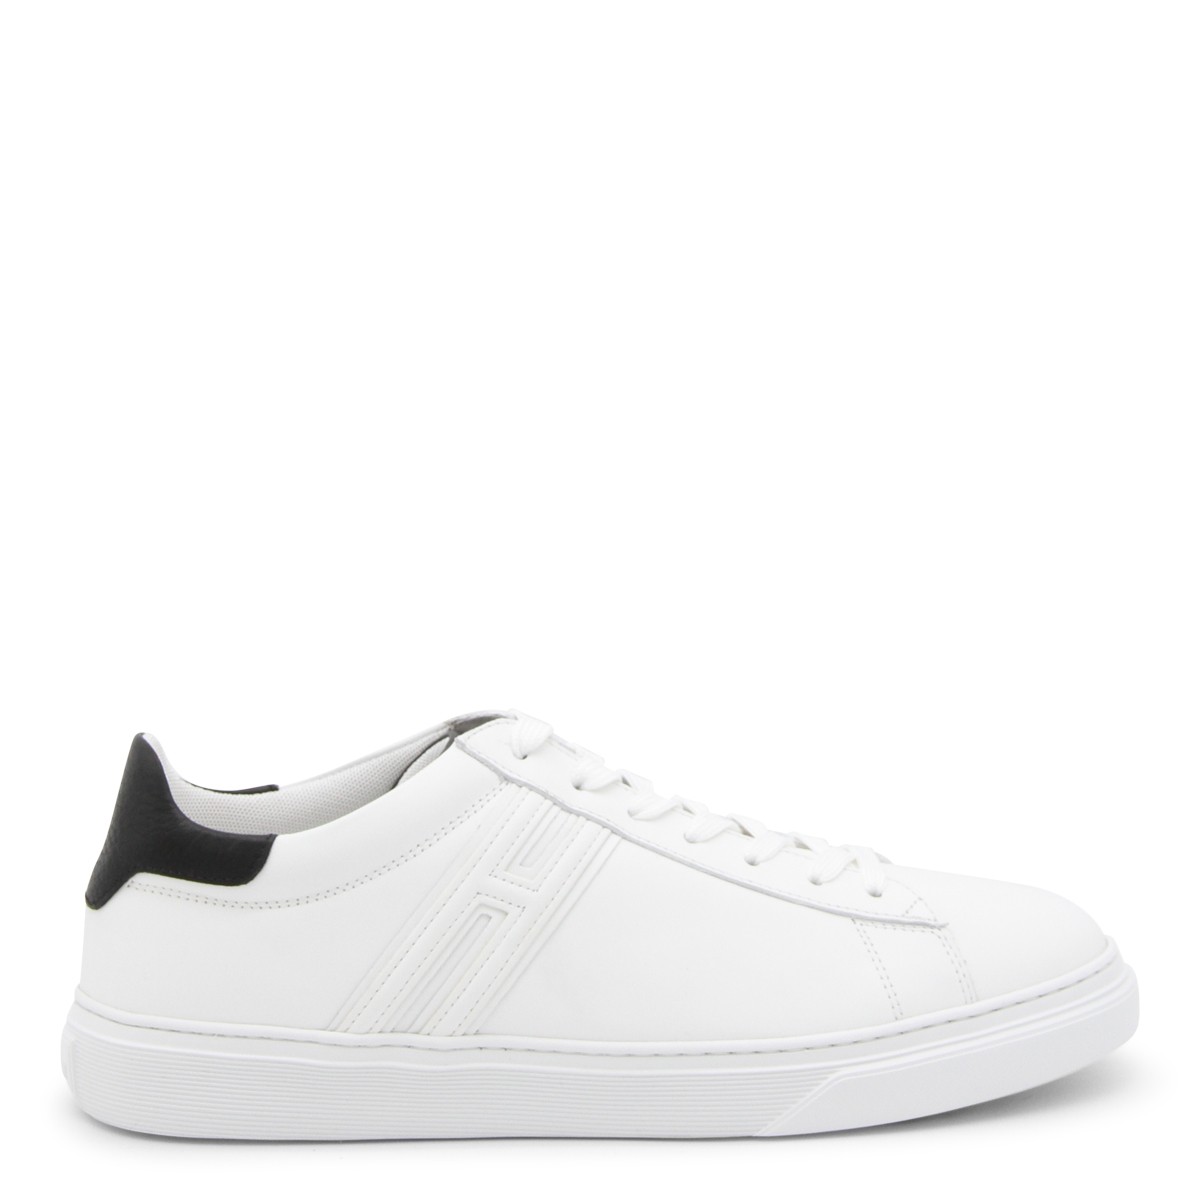 WHITE AND BLACK LEATHER H365 SNEAKERS